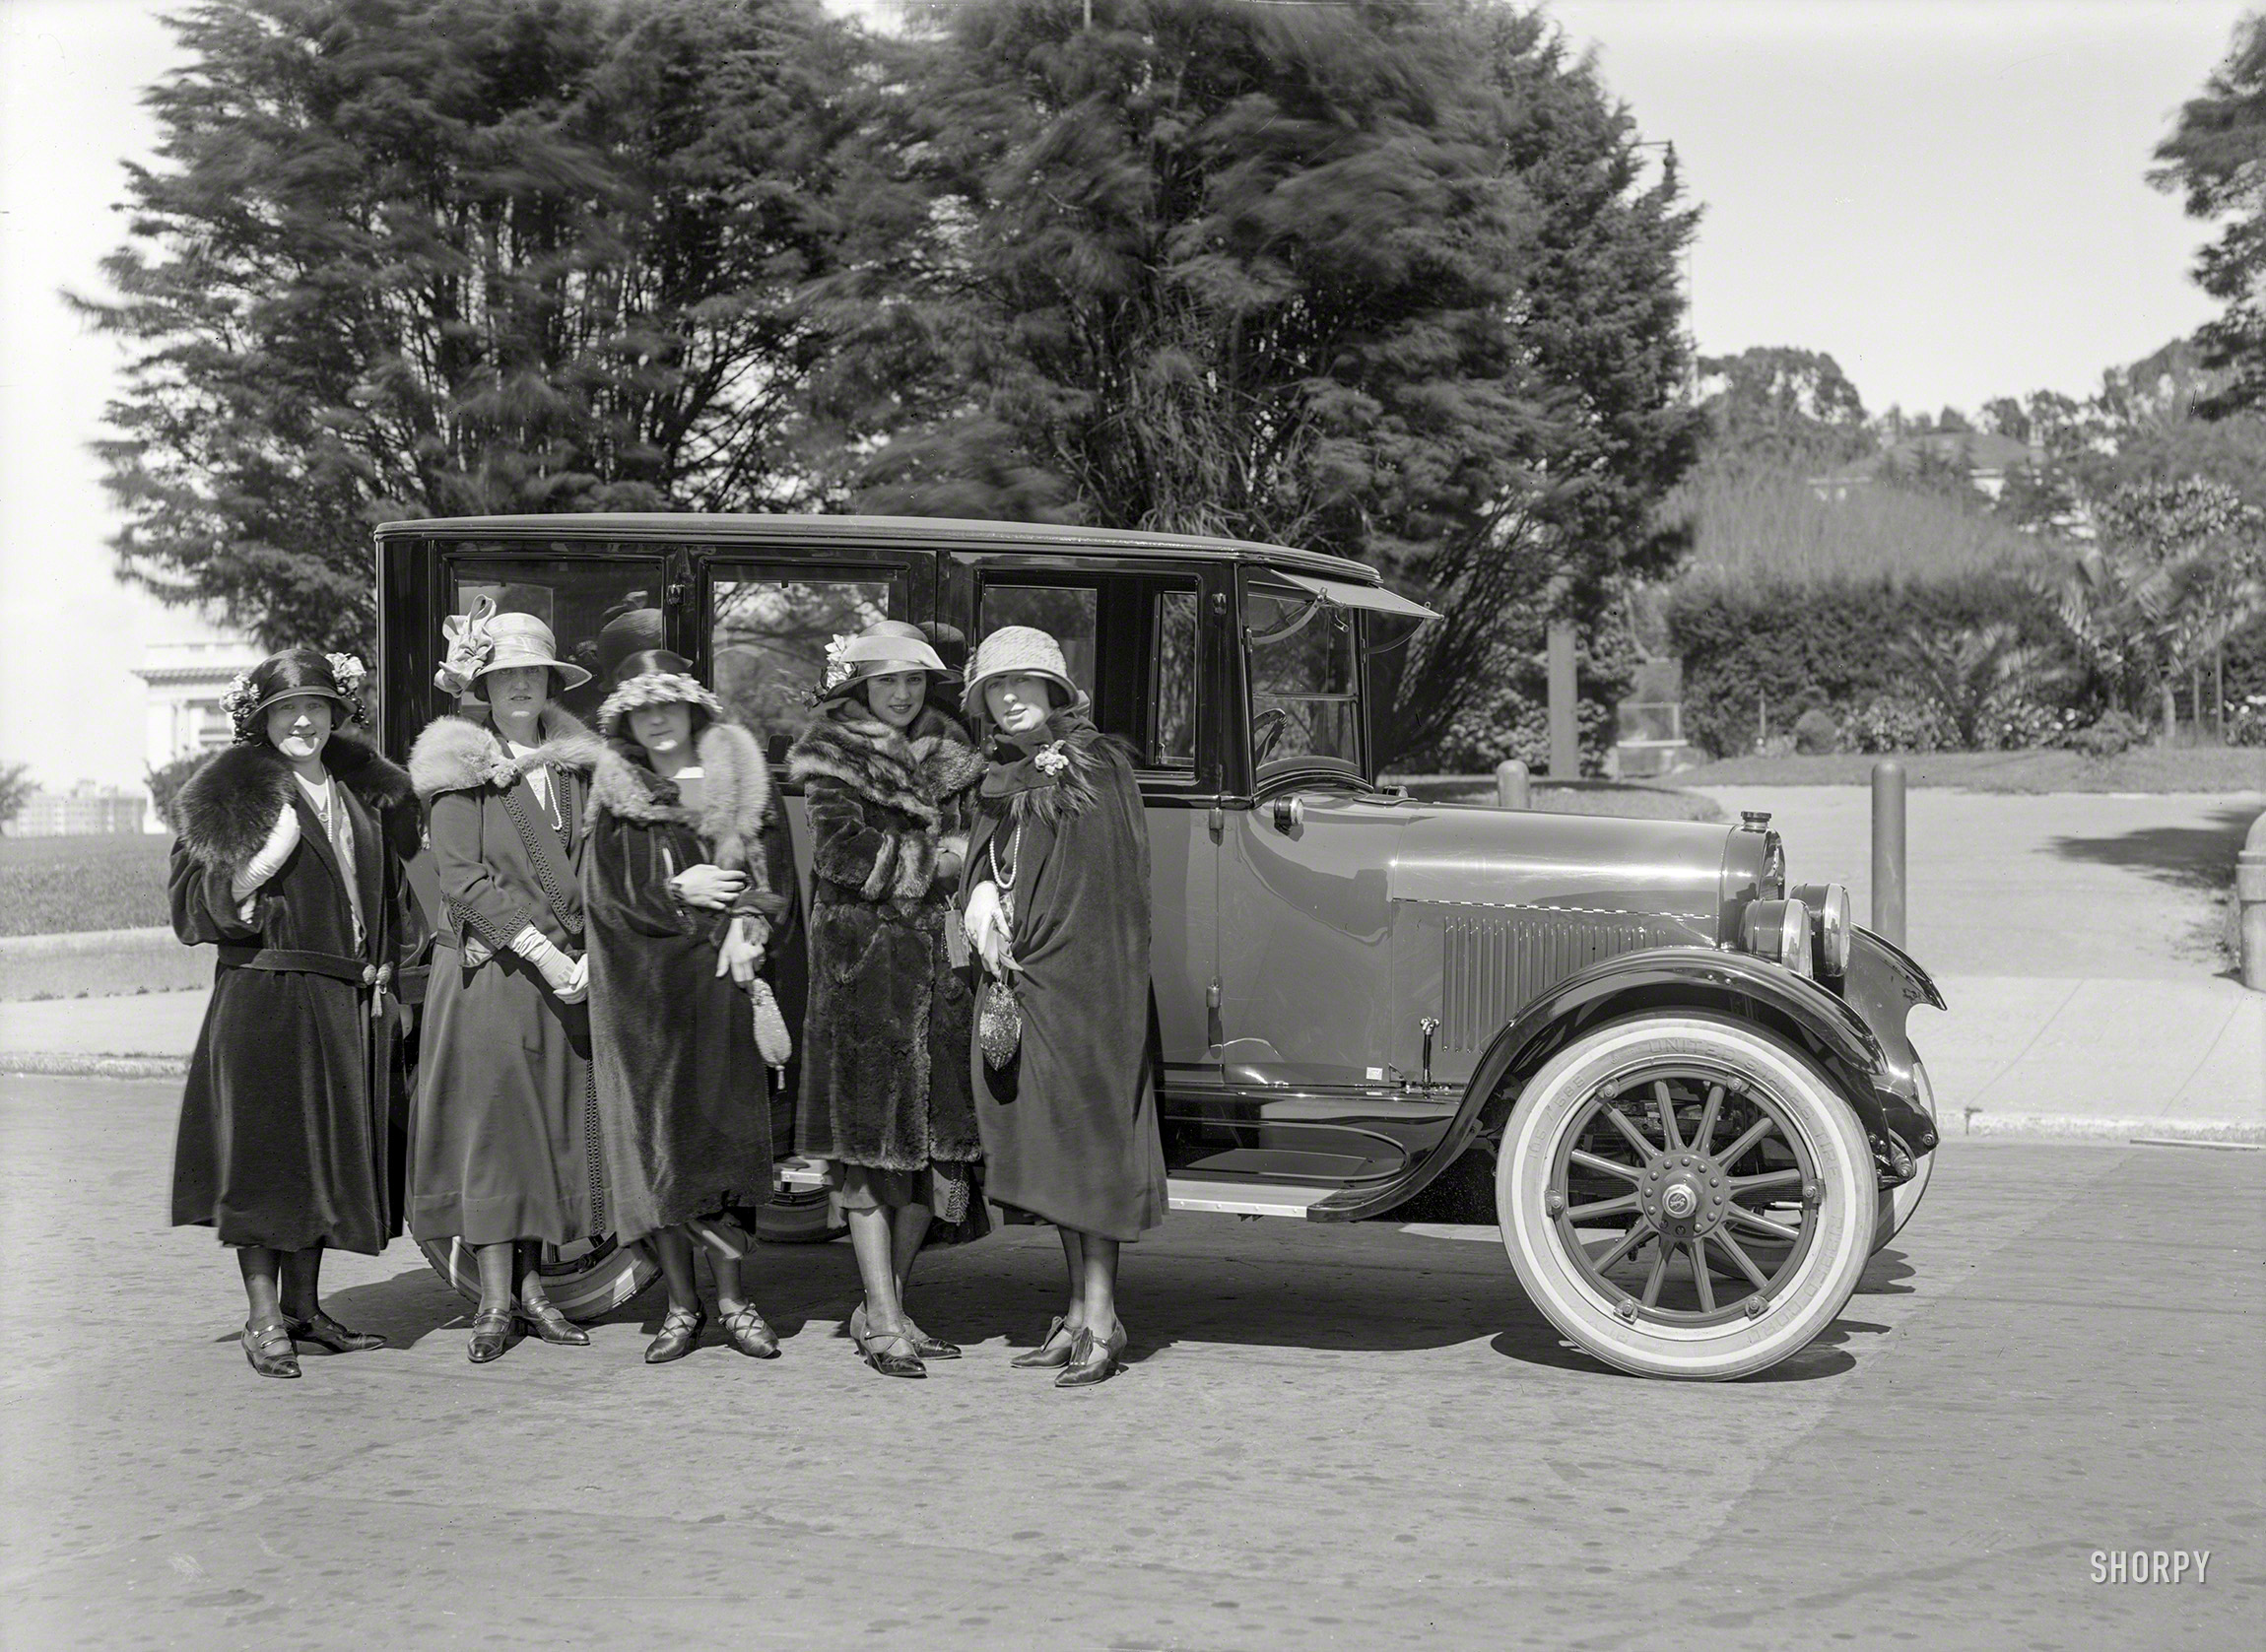 San Francisco circa 1924. "Buick sedan at Lafayette Park -- costumes." If only some of that style would rub off on the car. 5x7 glass negative. View full size.